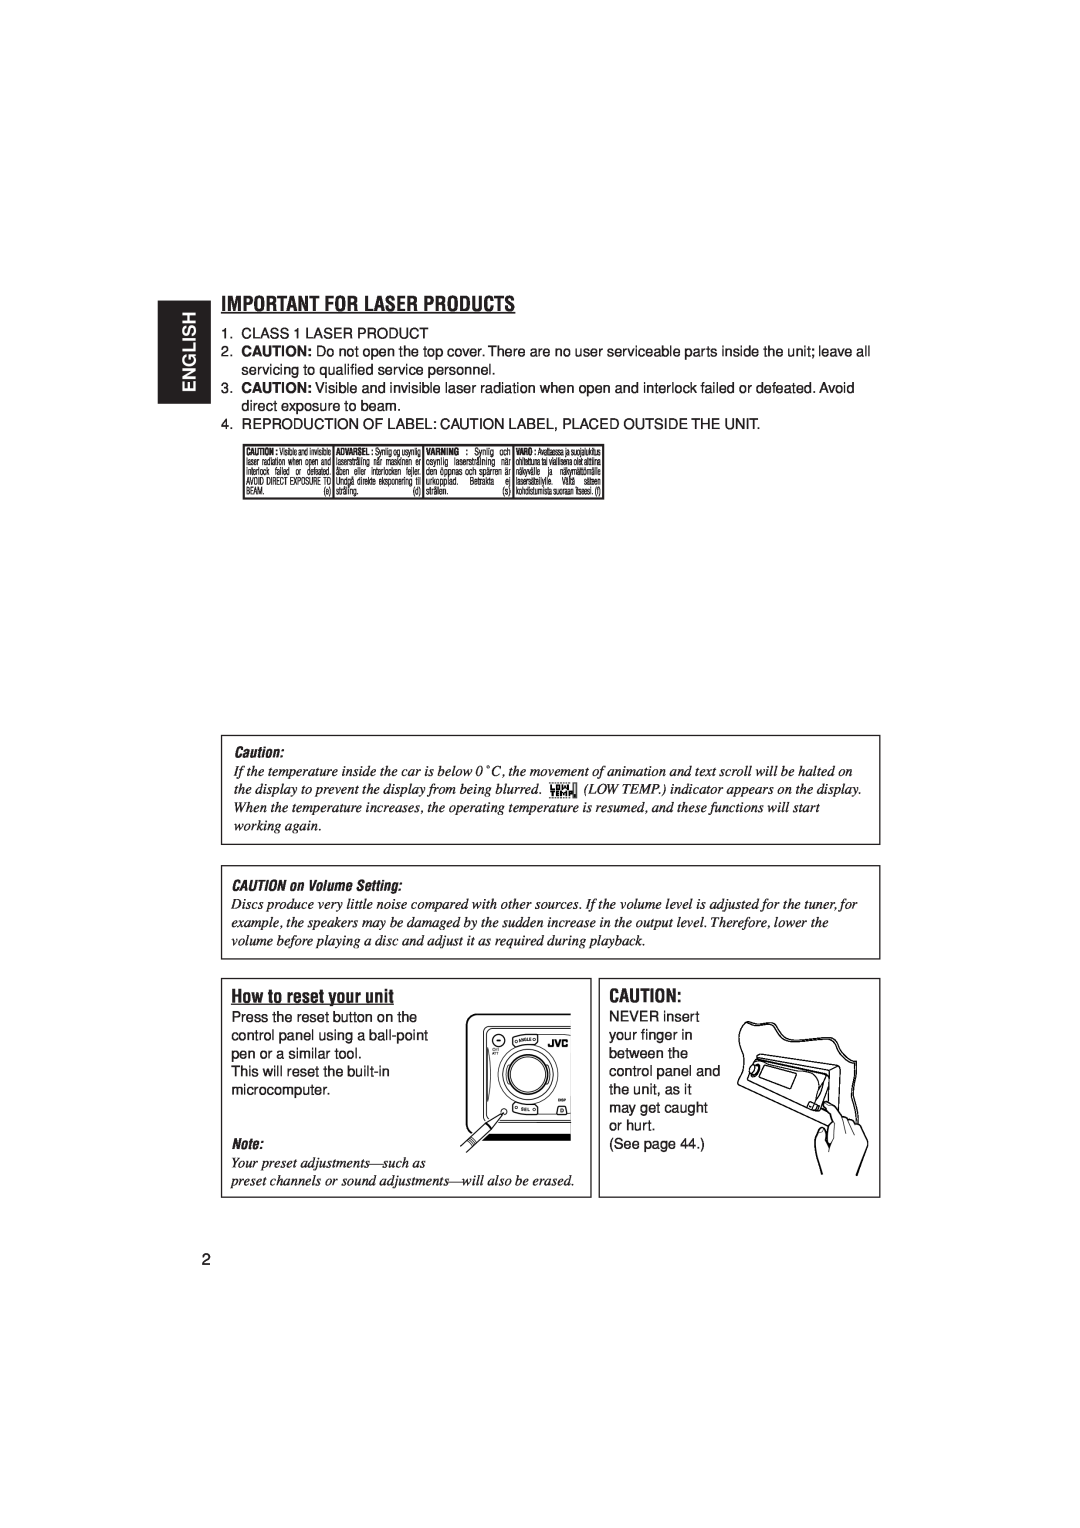 JVC KD-LH305 manual Important For Laser Products, English, How to reset your unit, CAUTION on Volume Setting 